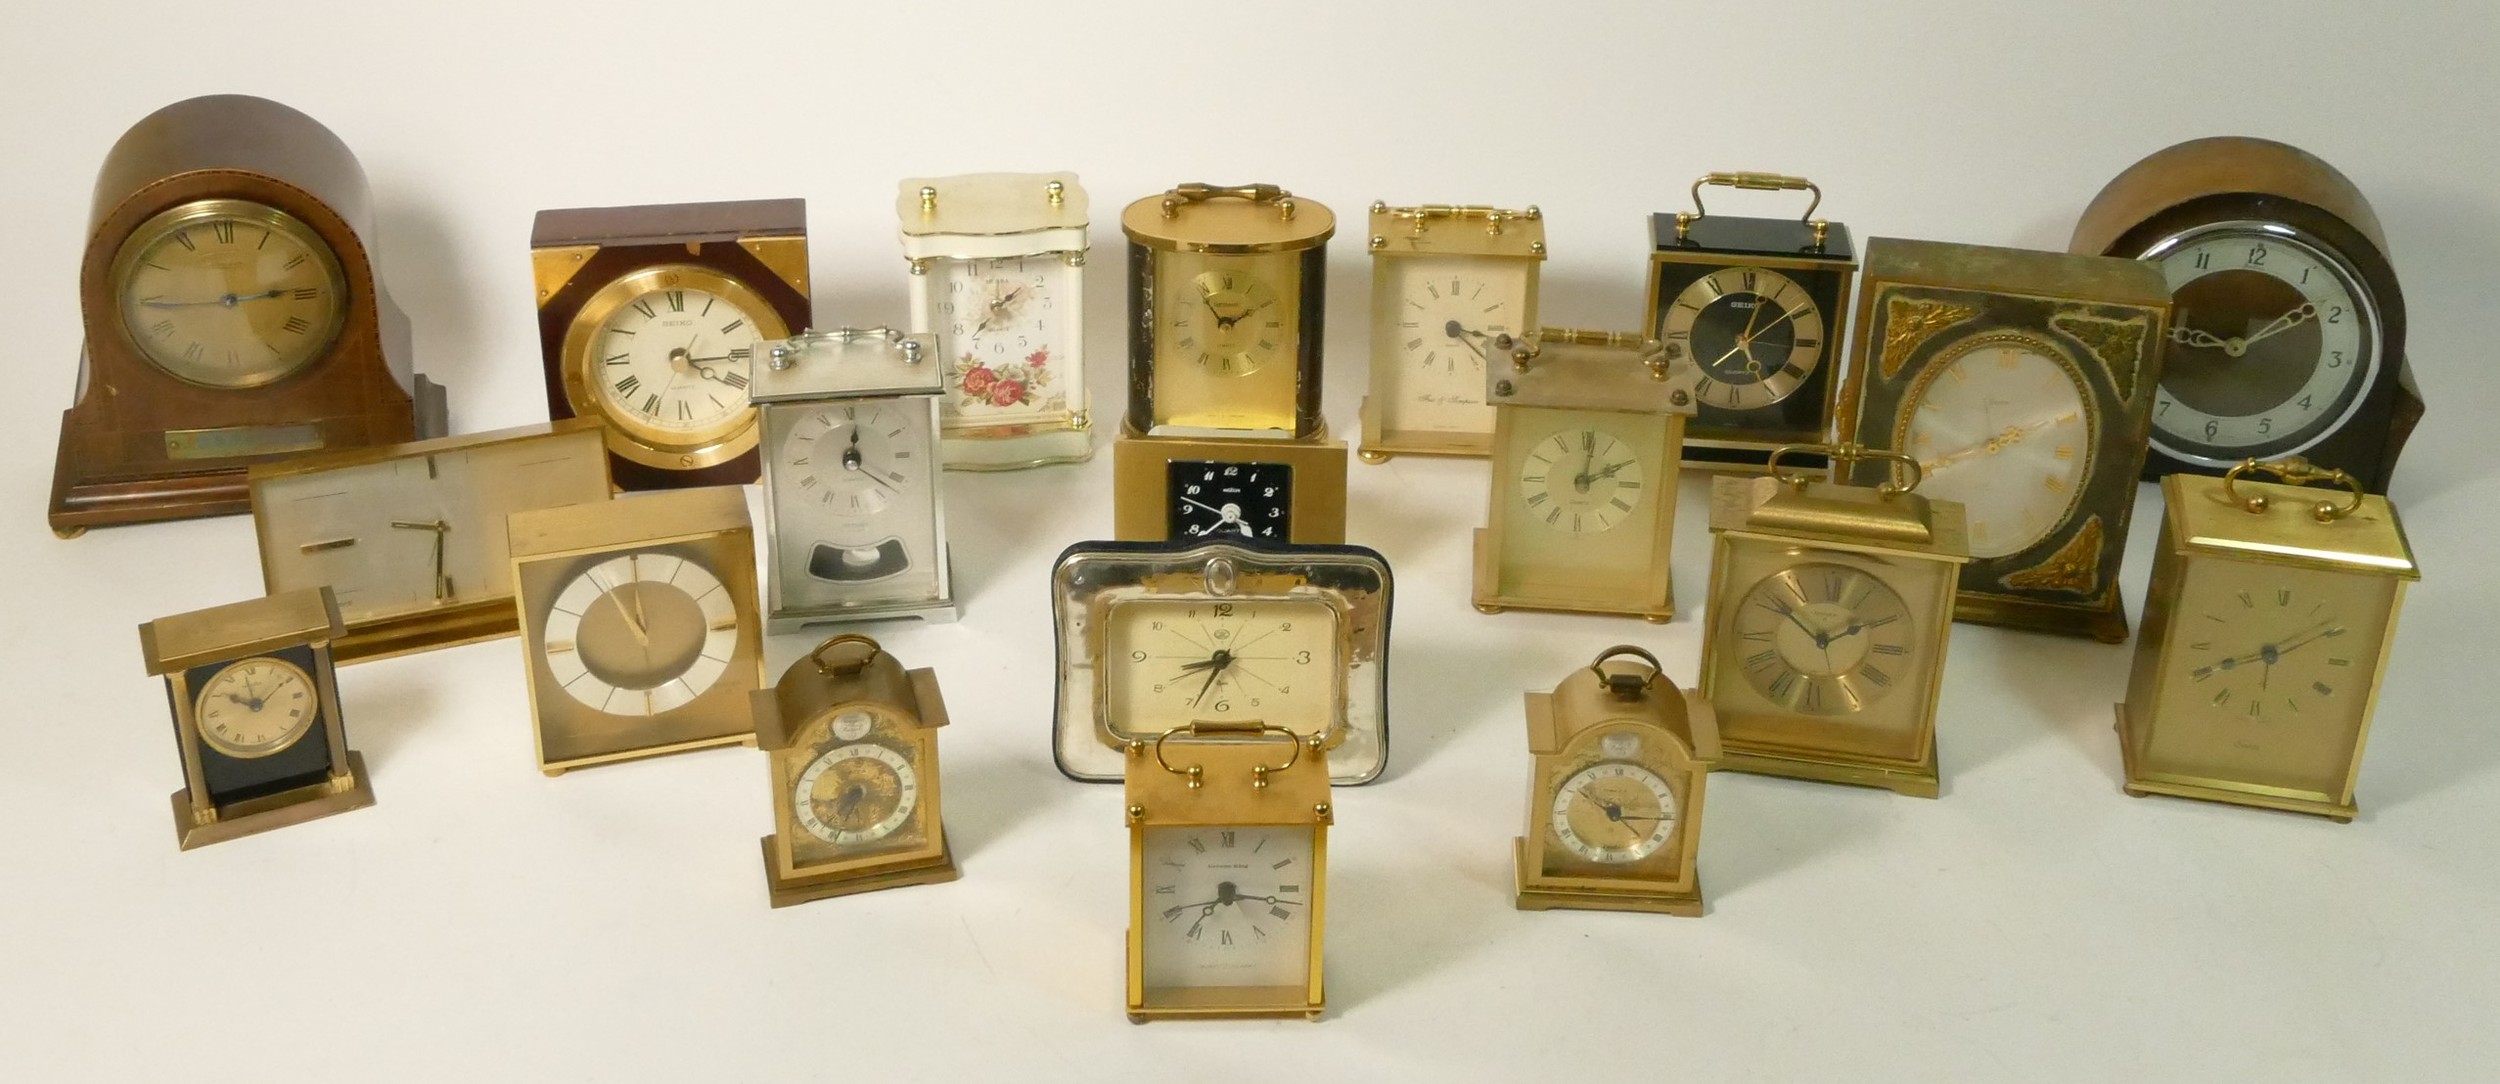 A collection of clocks to include, Swiza, Smiths, Seiko, Metamec and others (4) - Image 2 of 3